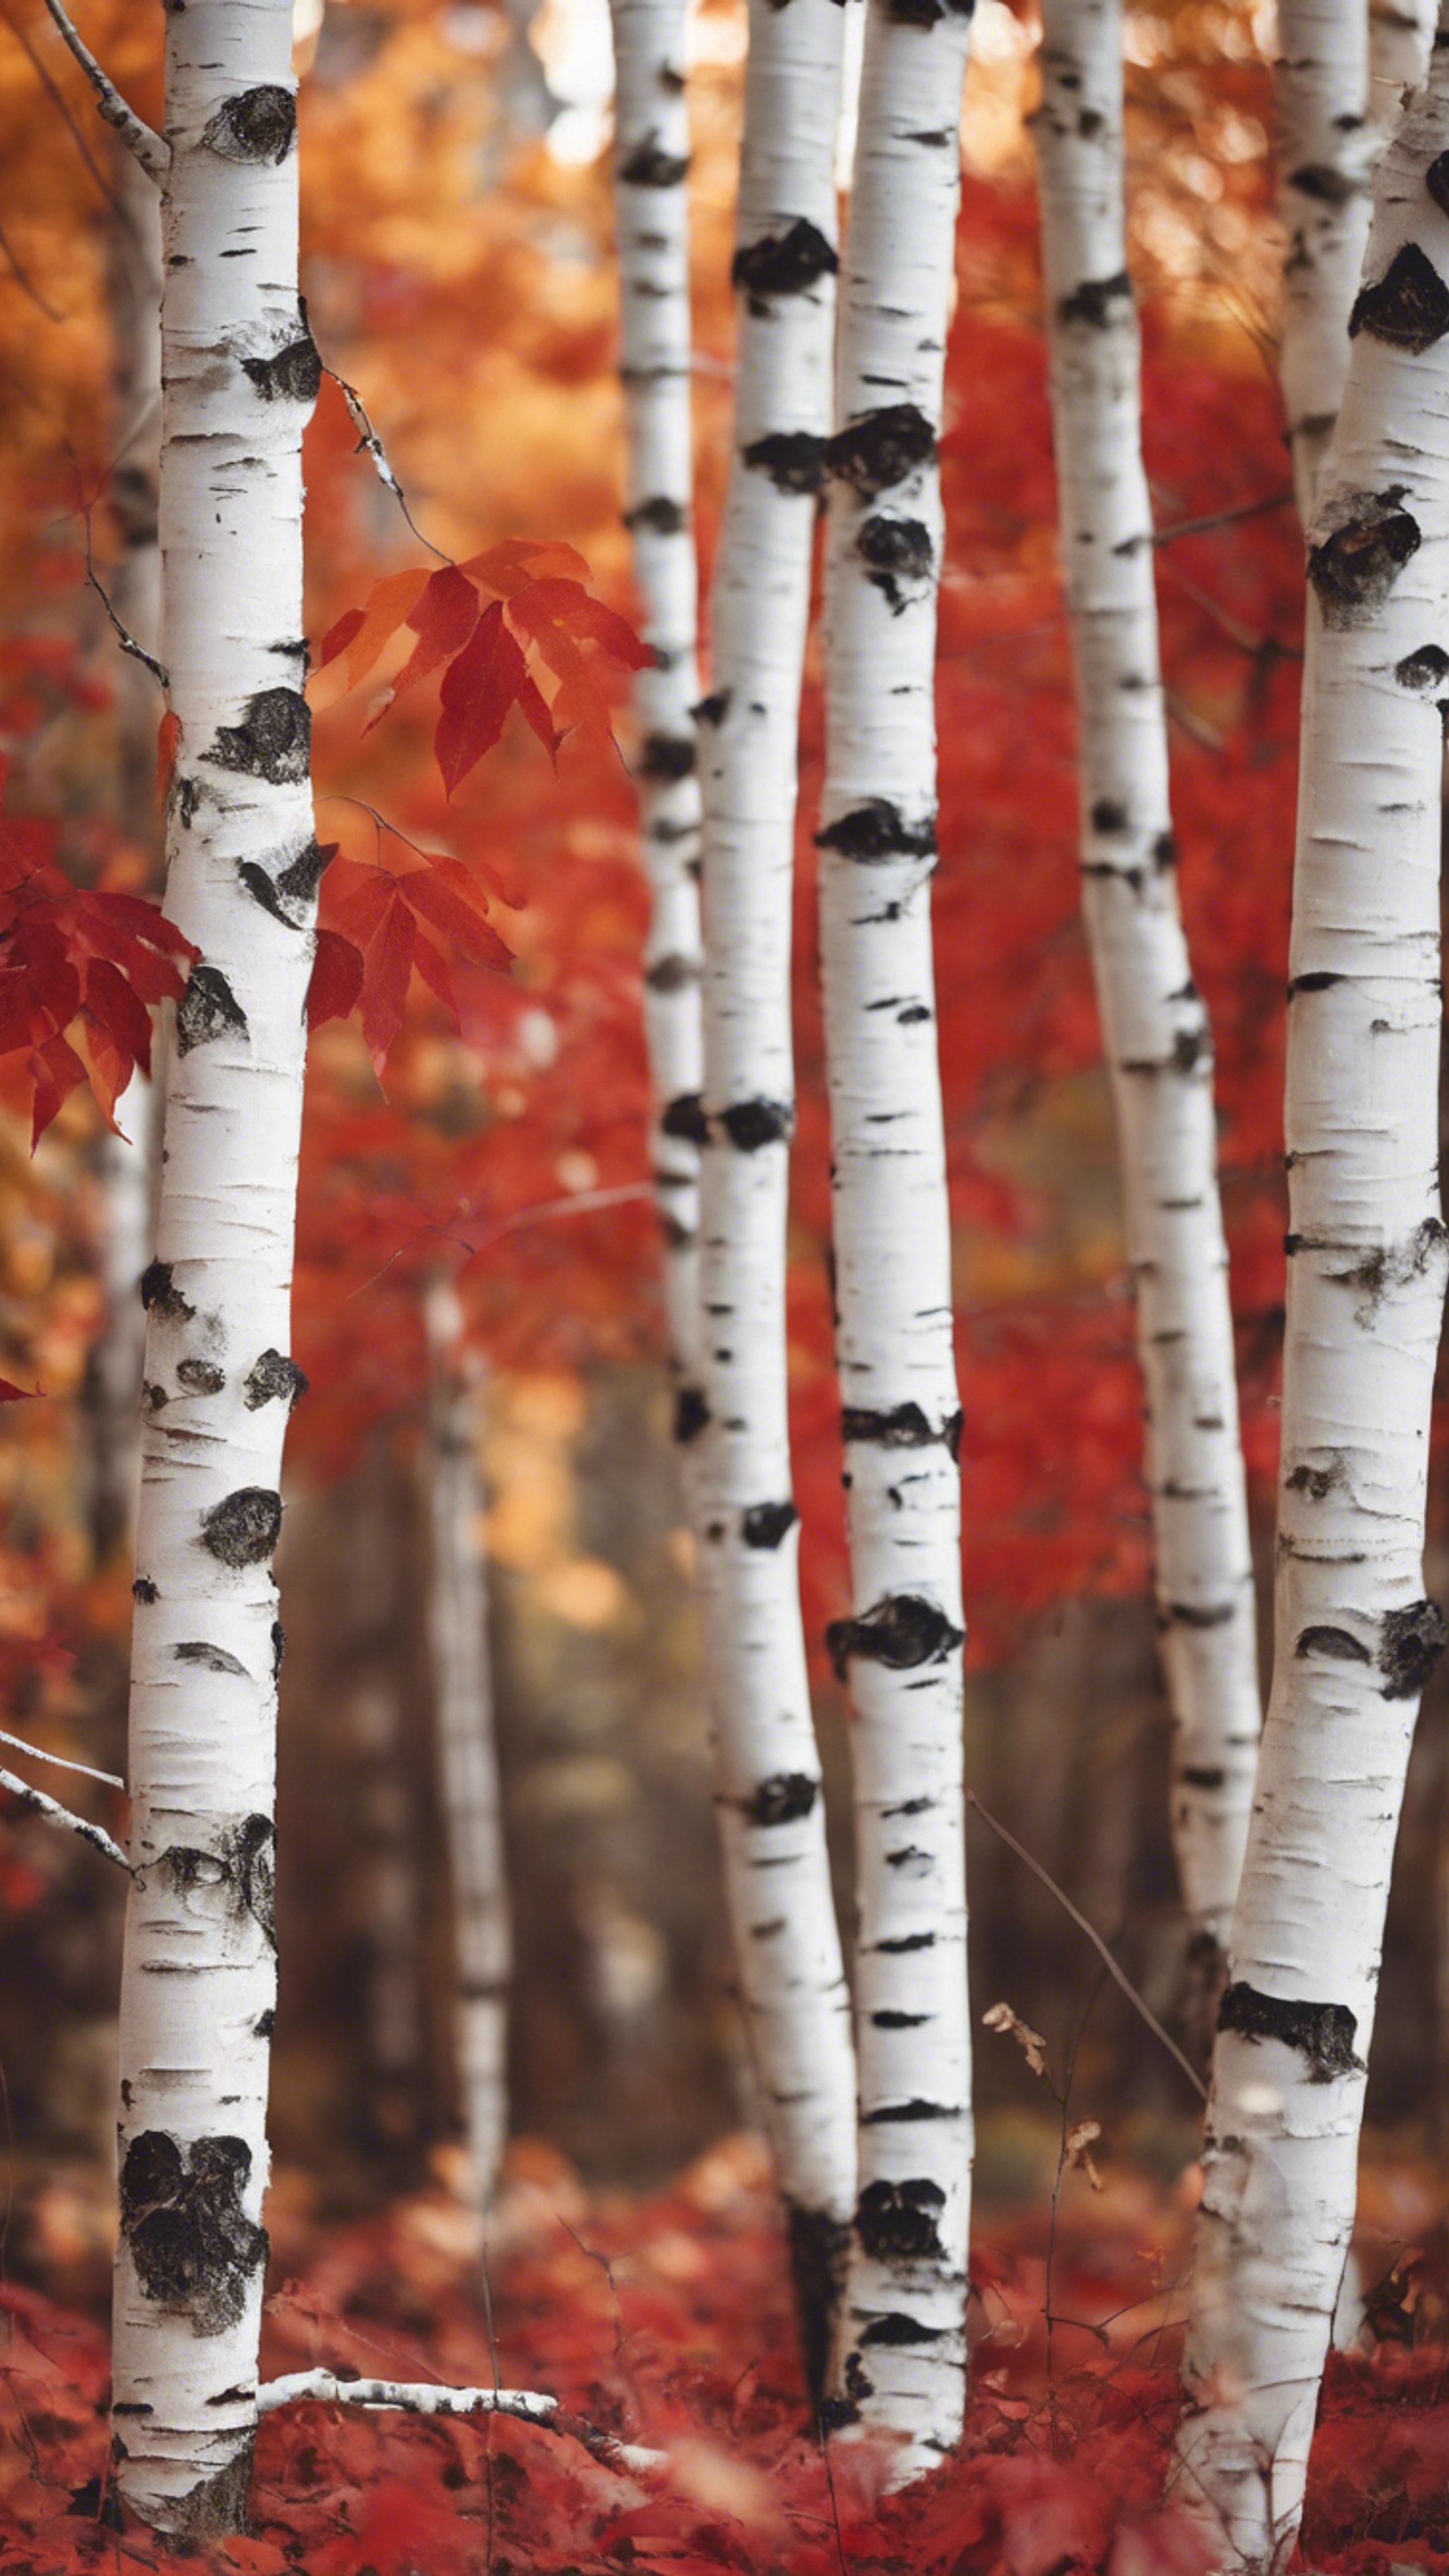 Fall scenes with white birches decked with autumn red foliage. Tapet[2b263cdc55c54552b5f9]